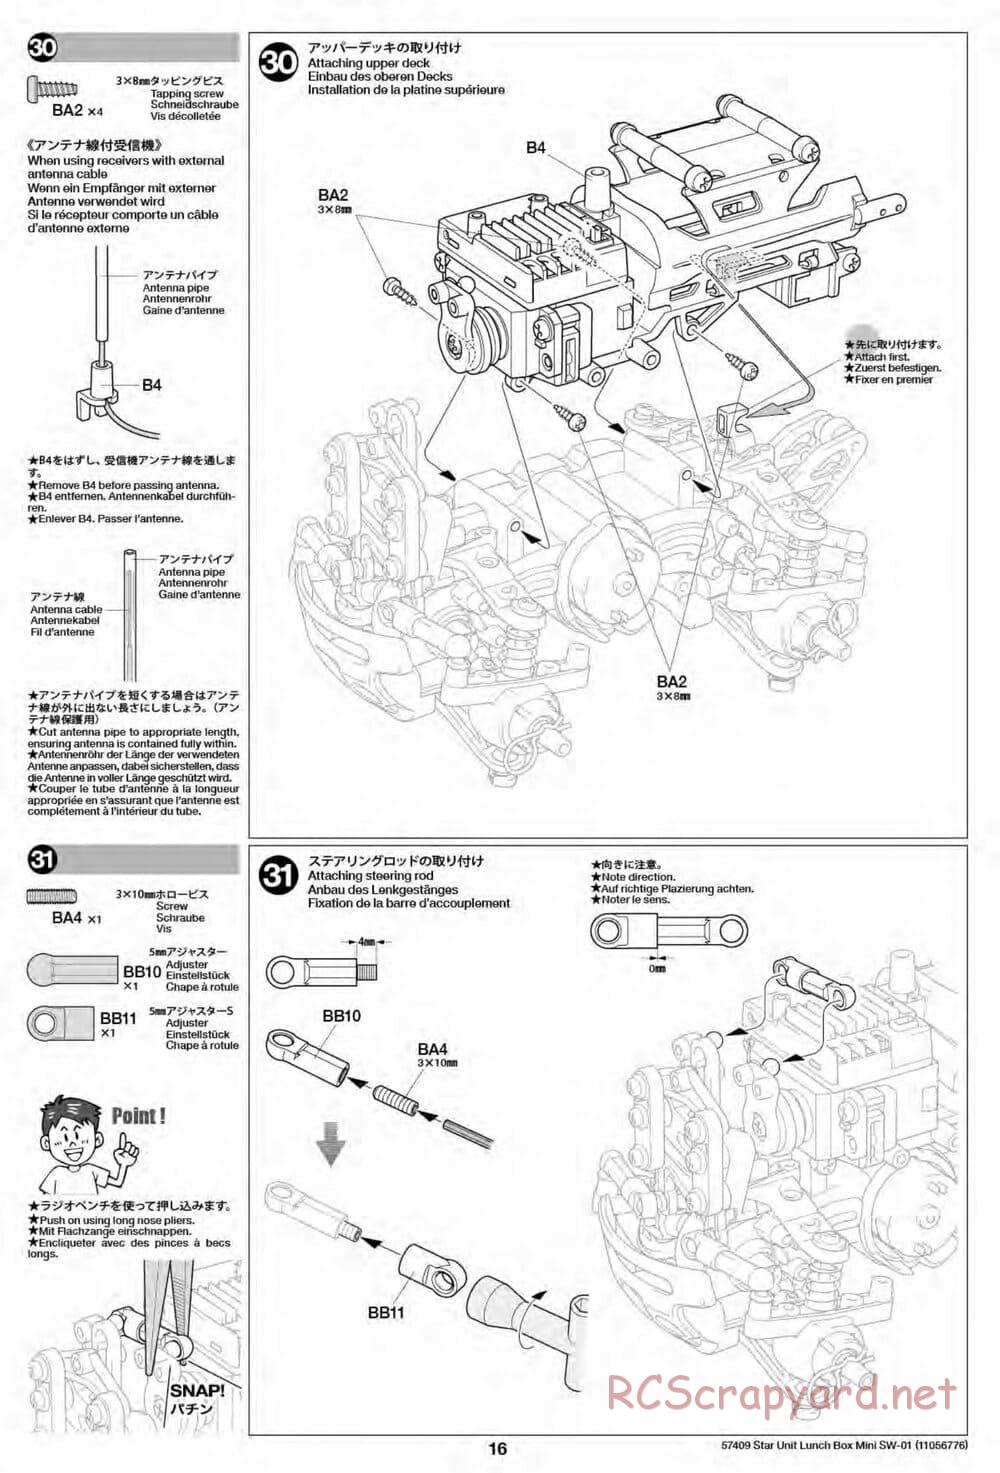 Tamiya - Lunch Box Mini - SW-01 Chassis - Manual - Page 16